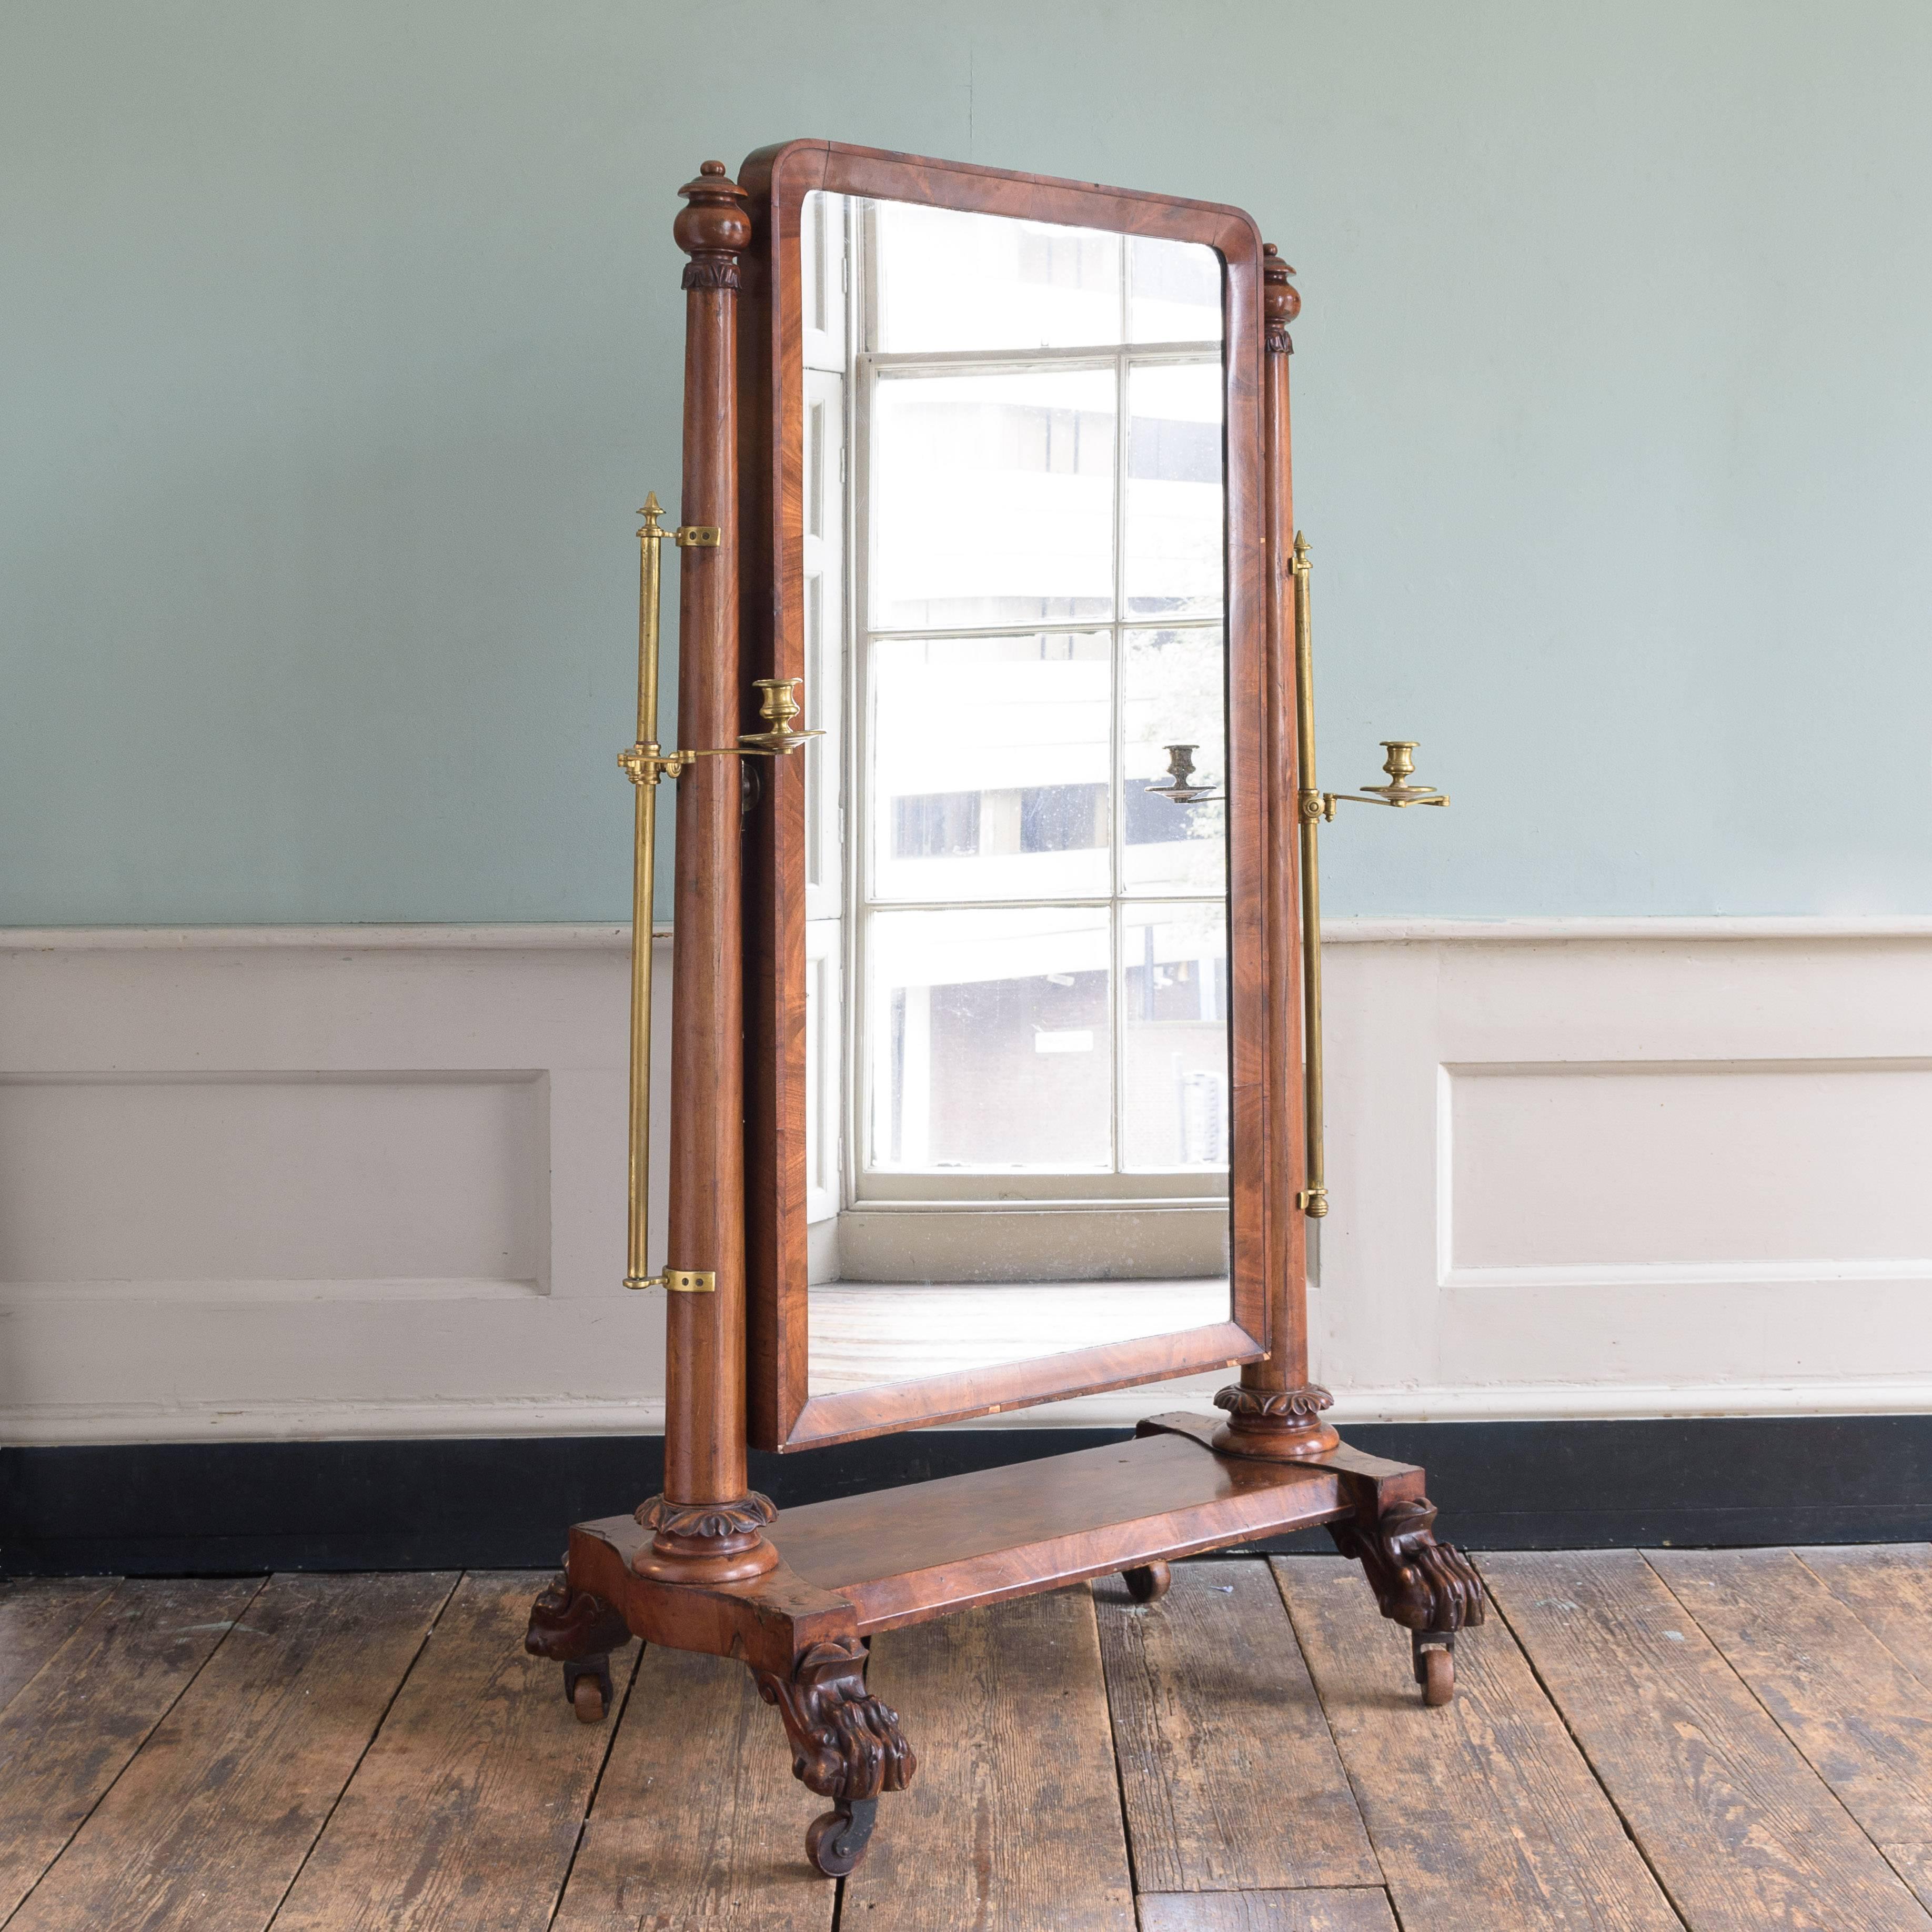 Mid-19th century mahogany cheval mirror, circa 1830-1840, the tapered cylindrical supports with adjustable brass candle sconces, on lion's paw feet with castors.